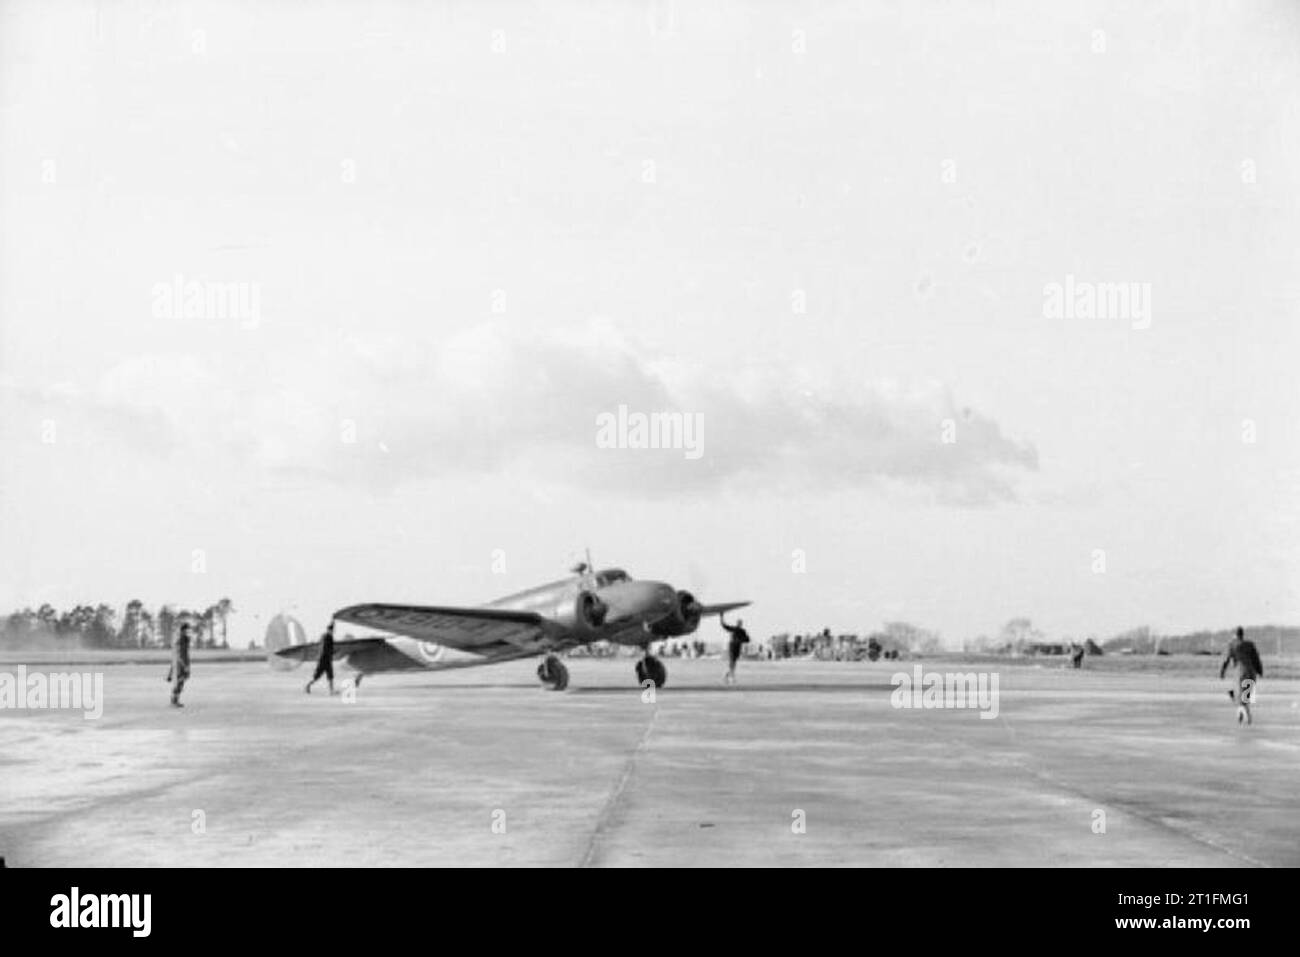 American Aircraft in RAF Service 1939-1945- Lockheed Model 10a Electra. Electra, W9104, of No. 24 Squadron RAF, taxying on an airfield in the United Kingdom. Formerly G-AFEB of British Airways Ltd, this aircraft was impressed into the RAF and delivered to No. 24 Squadron on 18 December 1939. It was struck off charge after a landing accident at Clifton, Yorkshire, on 12 October 1941. Stock Photo